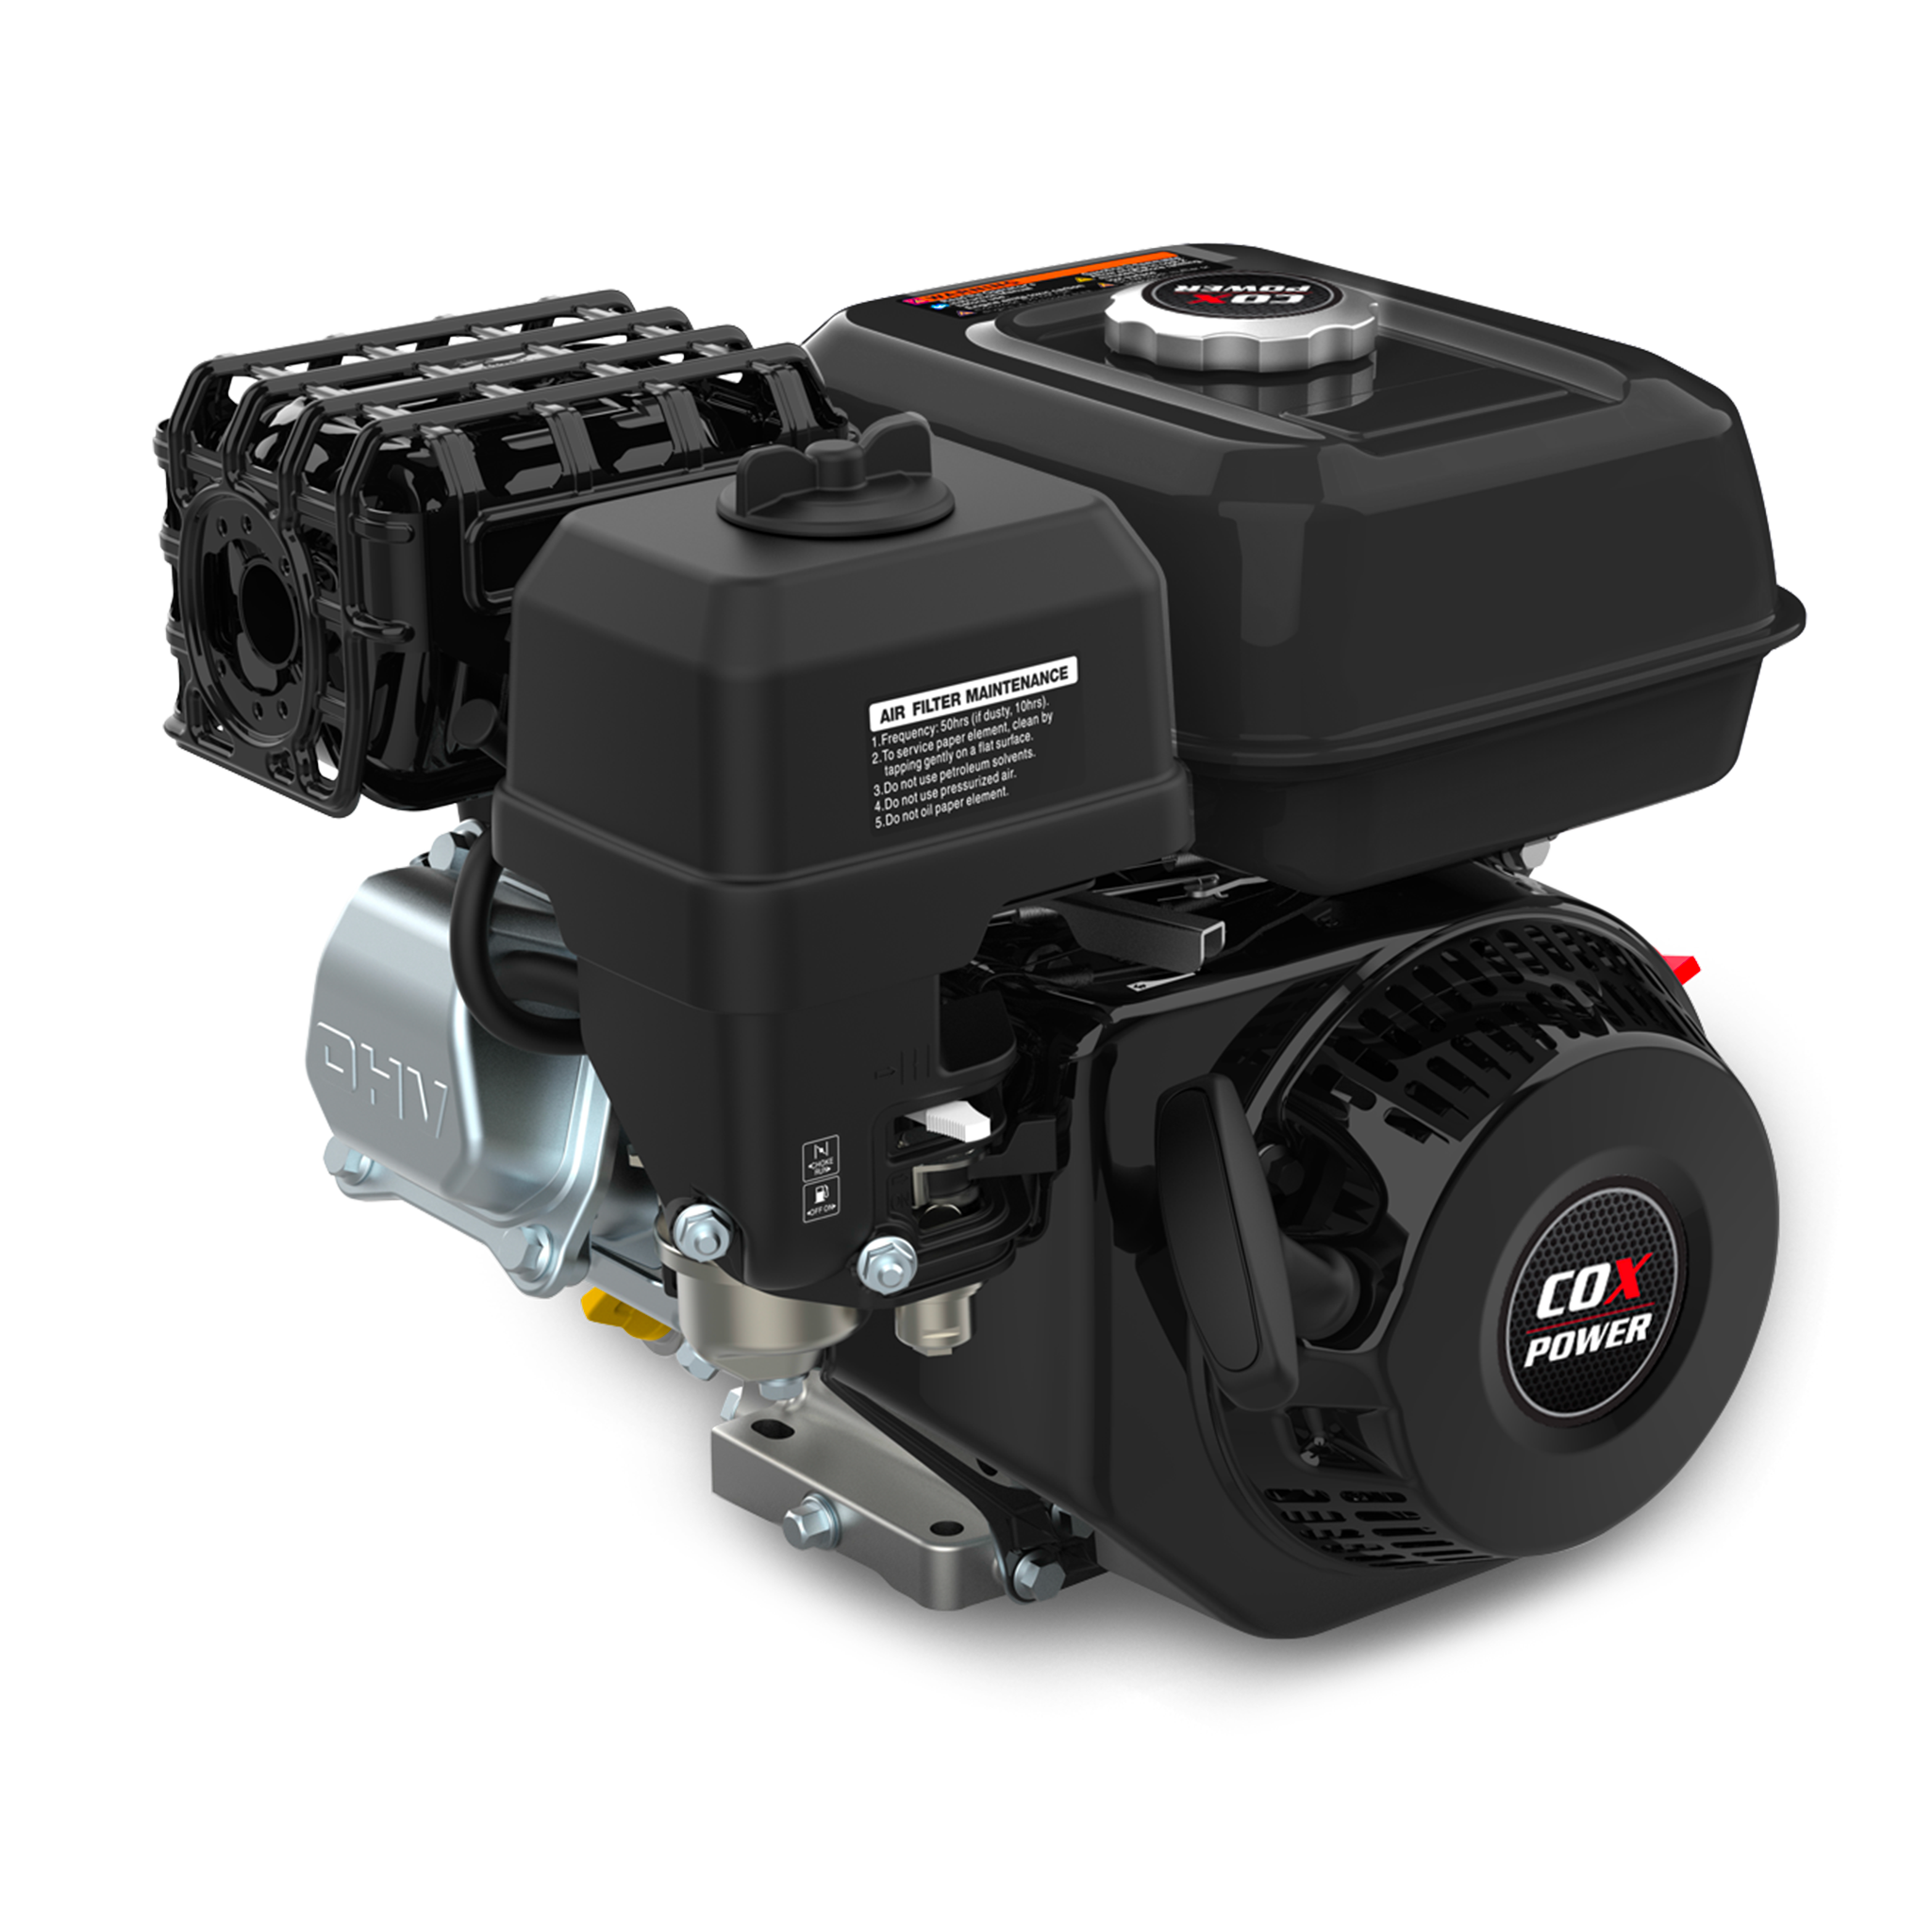 Product Image of COX Power Horizontal Engine 7.5hp 3/4" Threaded Shaft Recoil Start Engine